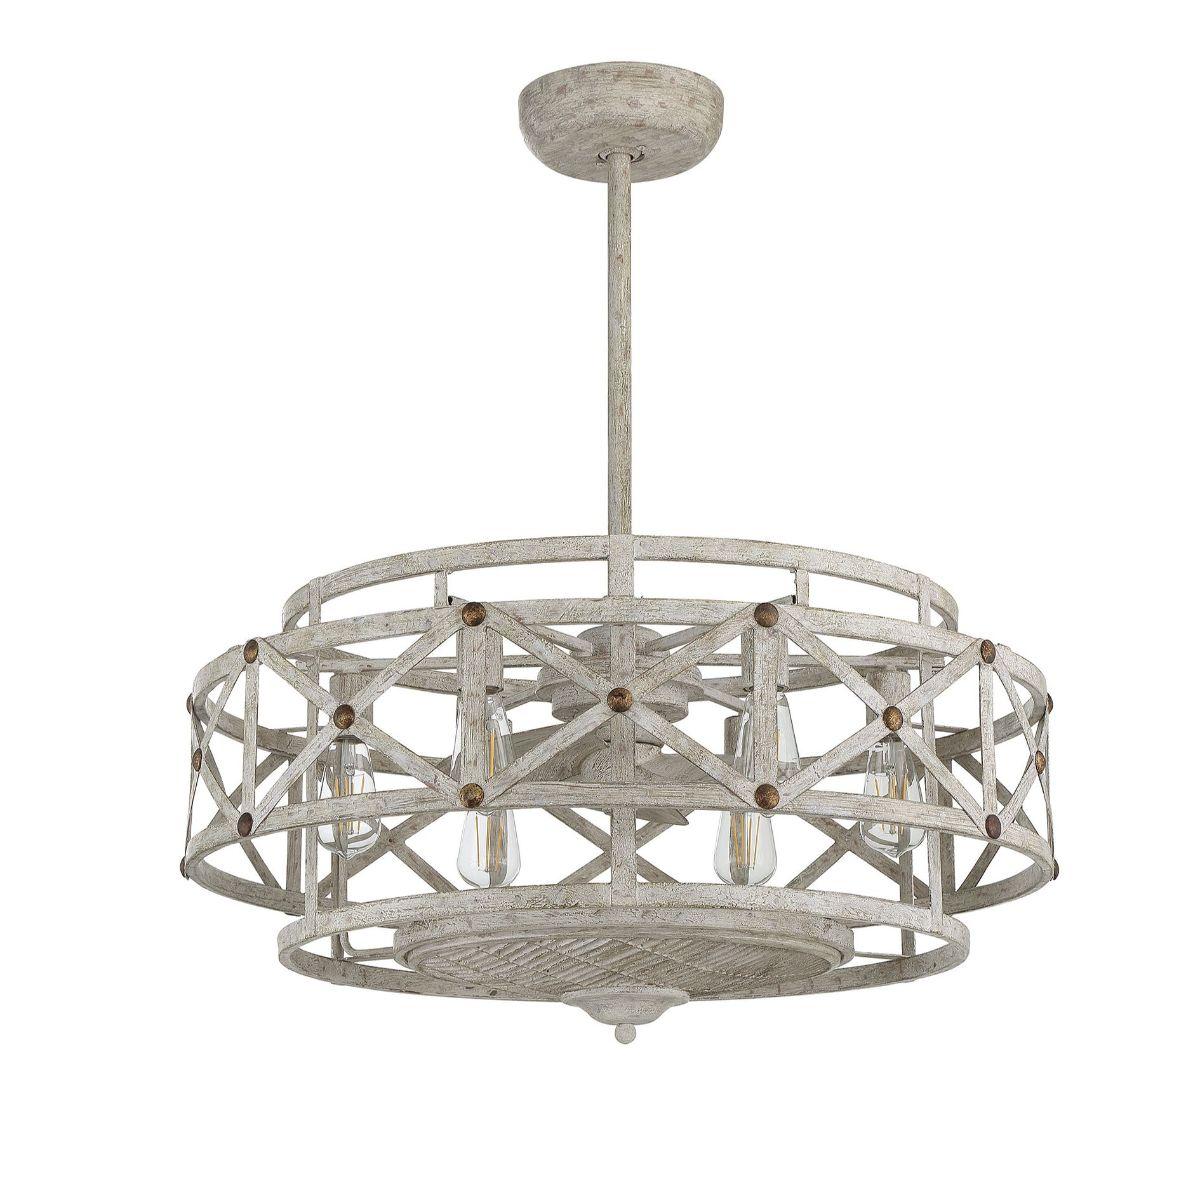 Colonade 30 Inch Chandelier Ceiling Fan With Light And Remote, Provence with Gold Accents Finish